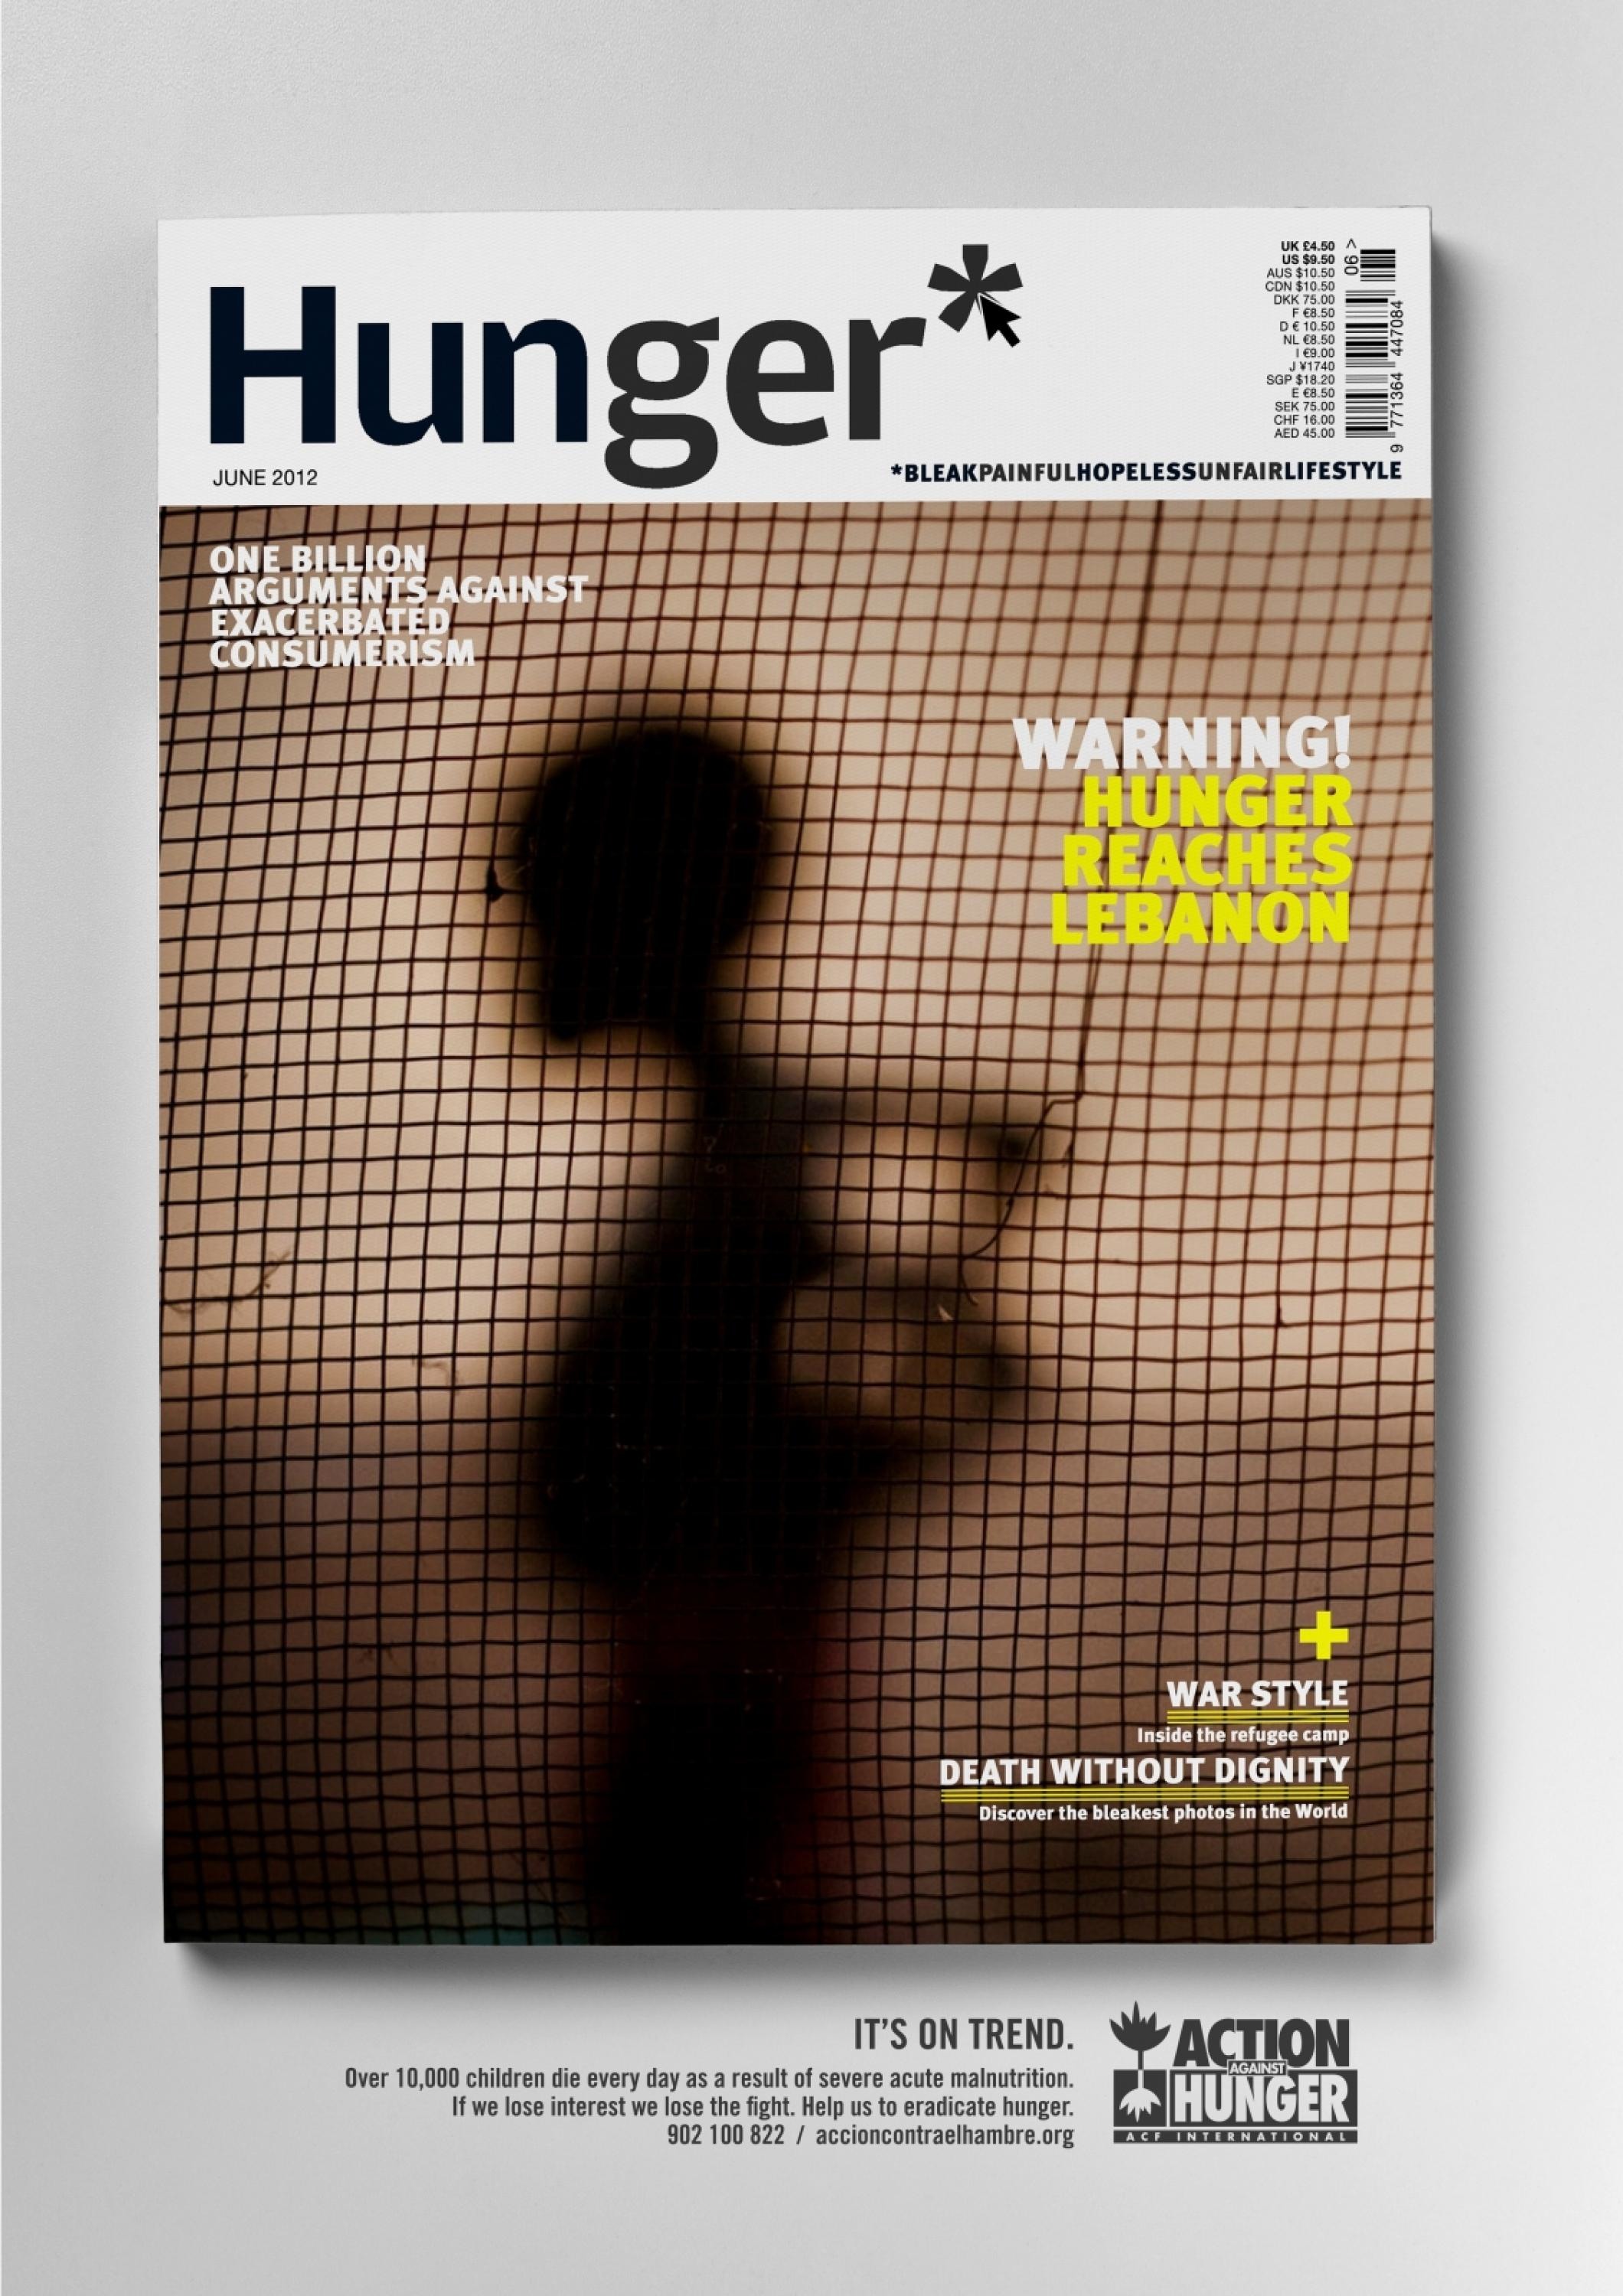 AWARENESS CAMPAIGN ON HUNGER